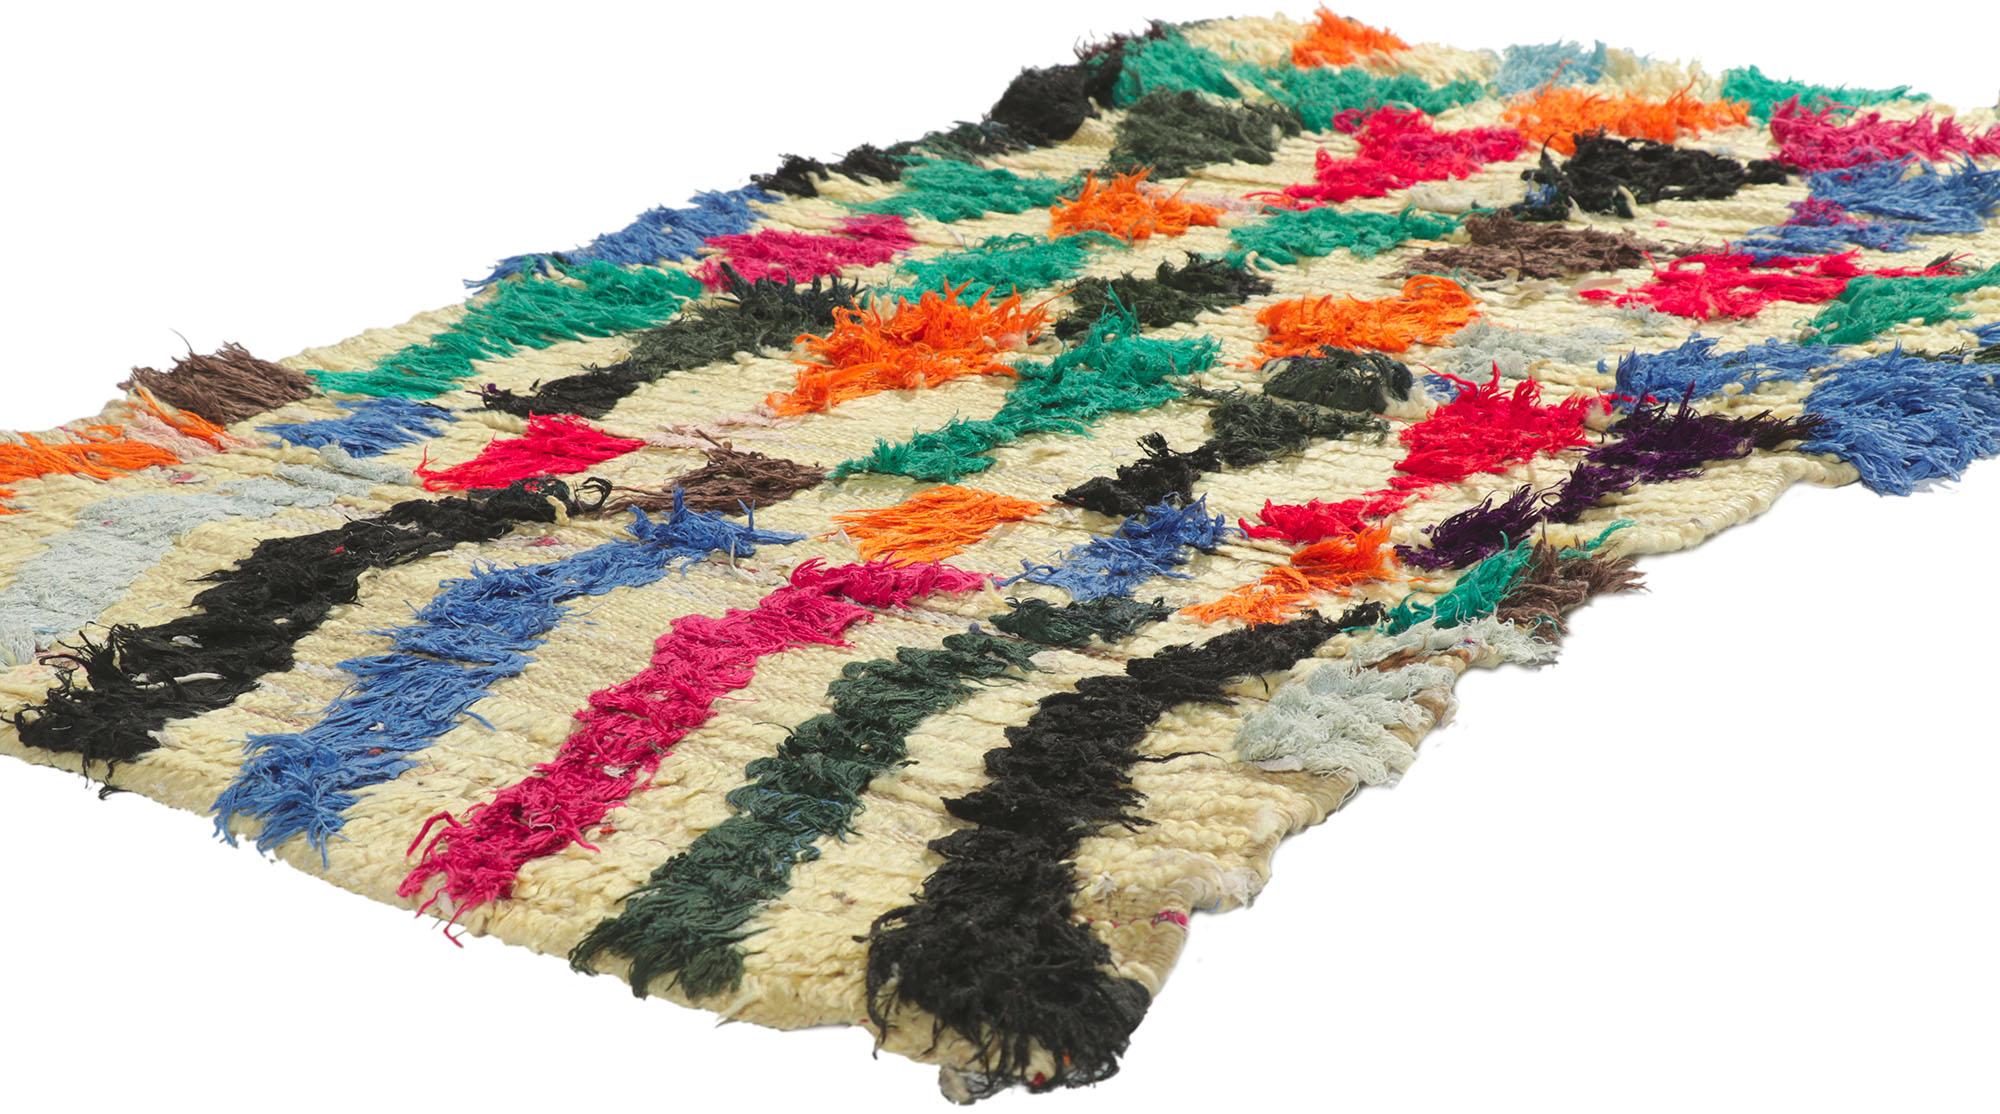 21601 vintage Berber Moroccan Boucherouite rag rug 03'01 x 05'01. With its expressive tribal design, incredible detail and texture, this hand knotted vintage Berber Moroccan Boucherouite rug is a captivating vision of woven beauty. The abrashed